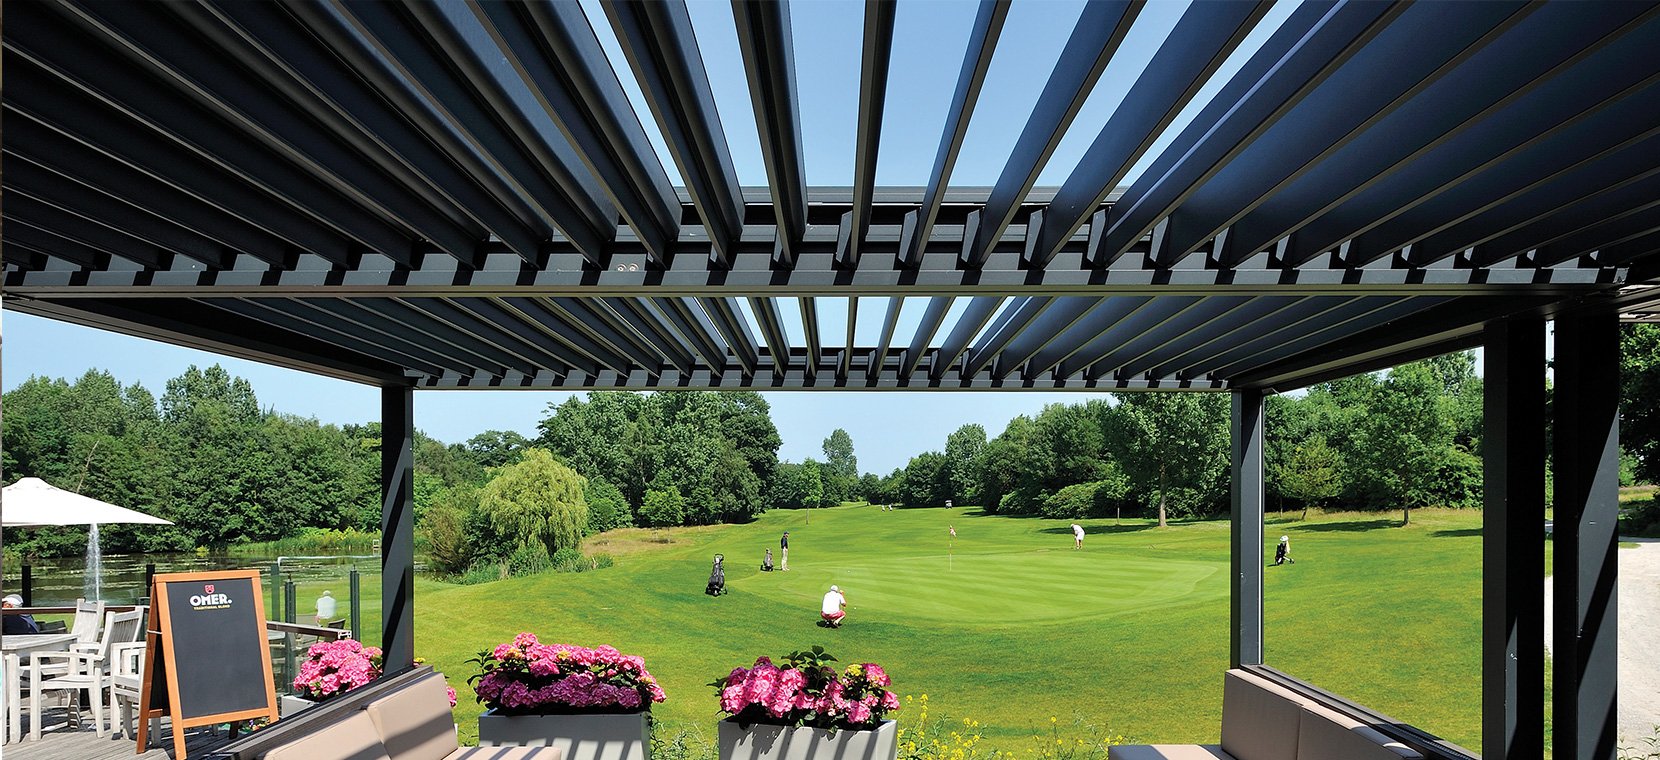 Golf Outdoor Structure